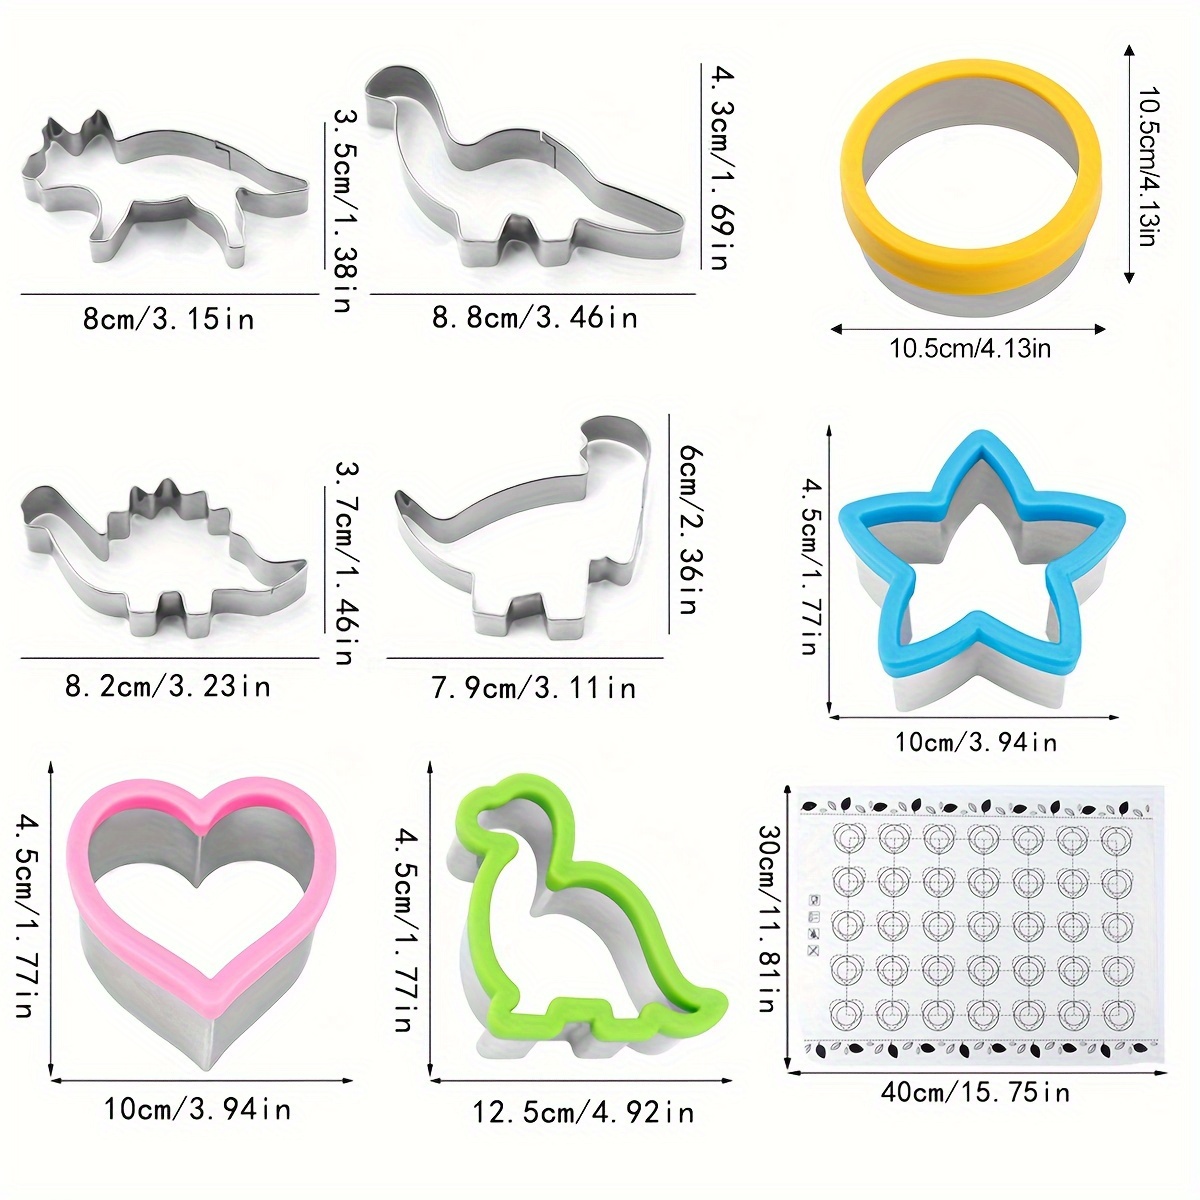 8pcs animal cookie cutters stainless steel pastry cutter biscuit molds baking tools kitchen gadgets kitchen accessories with 1pc baking mat